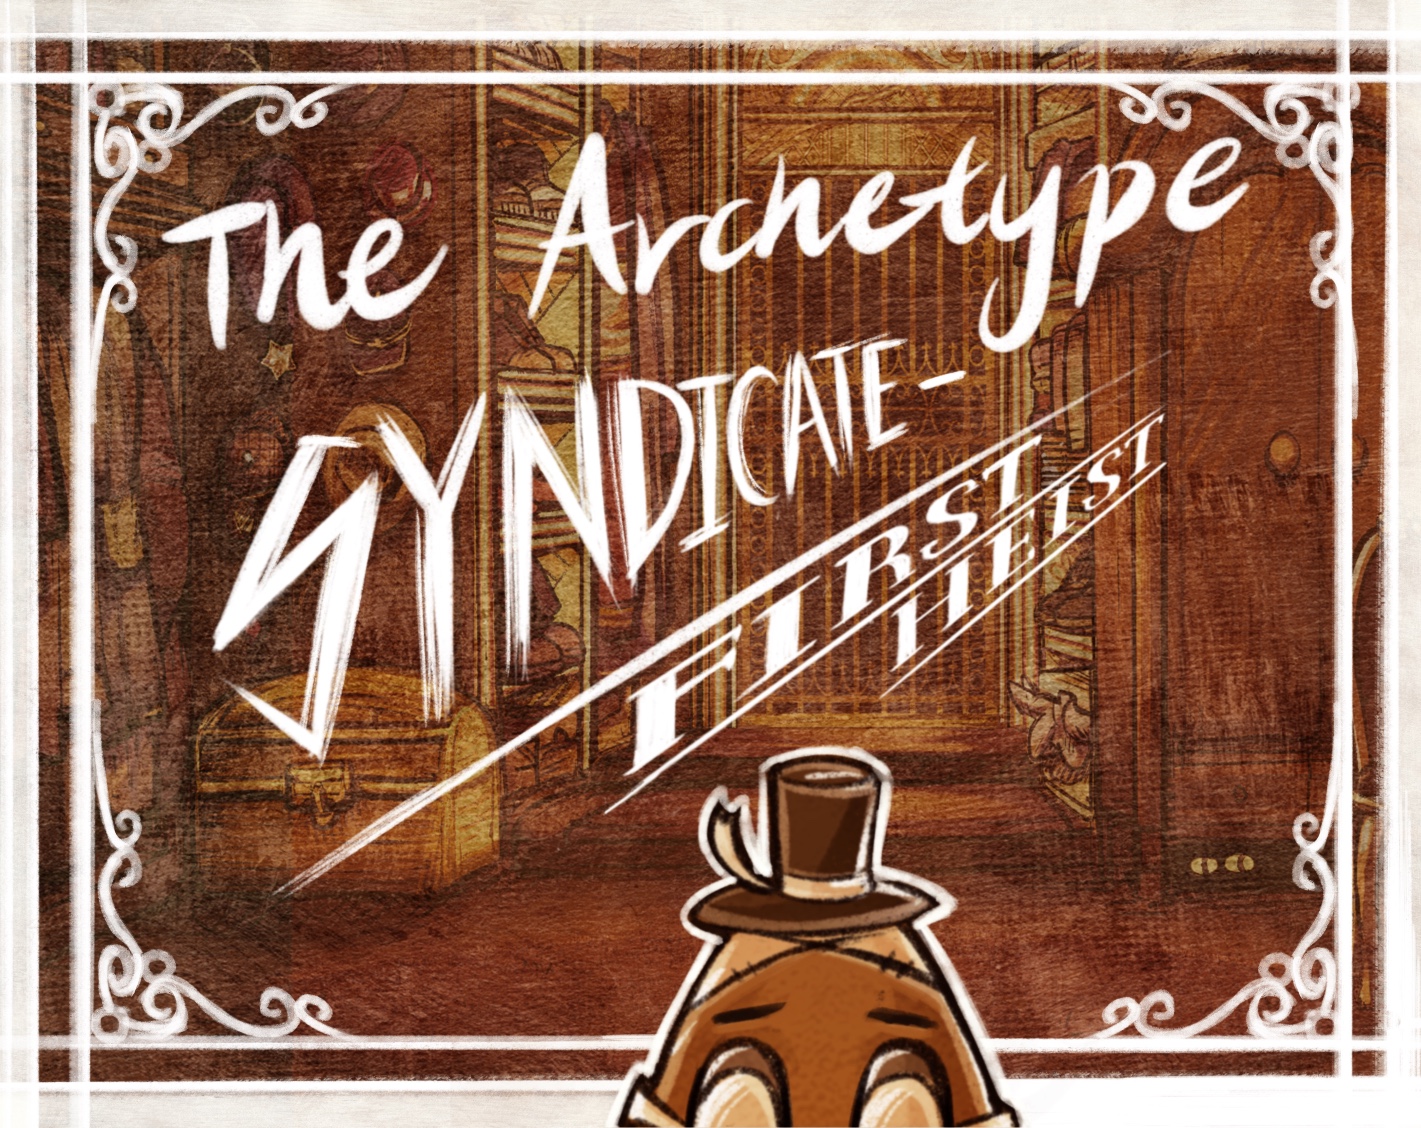 The Archetype Syndicate